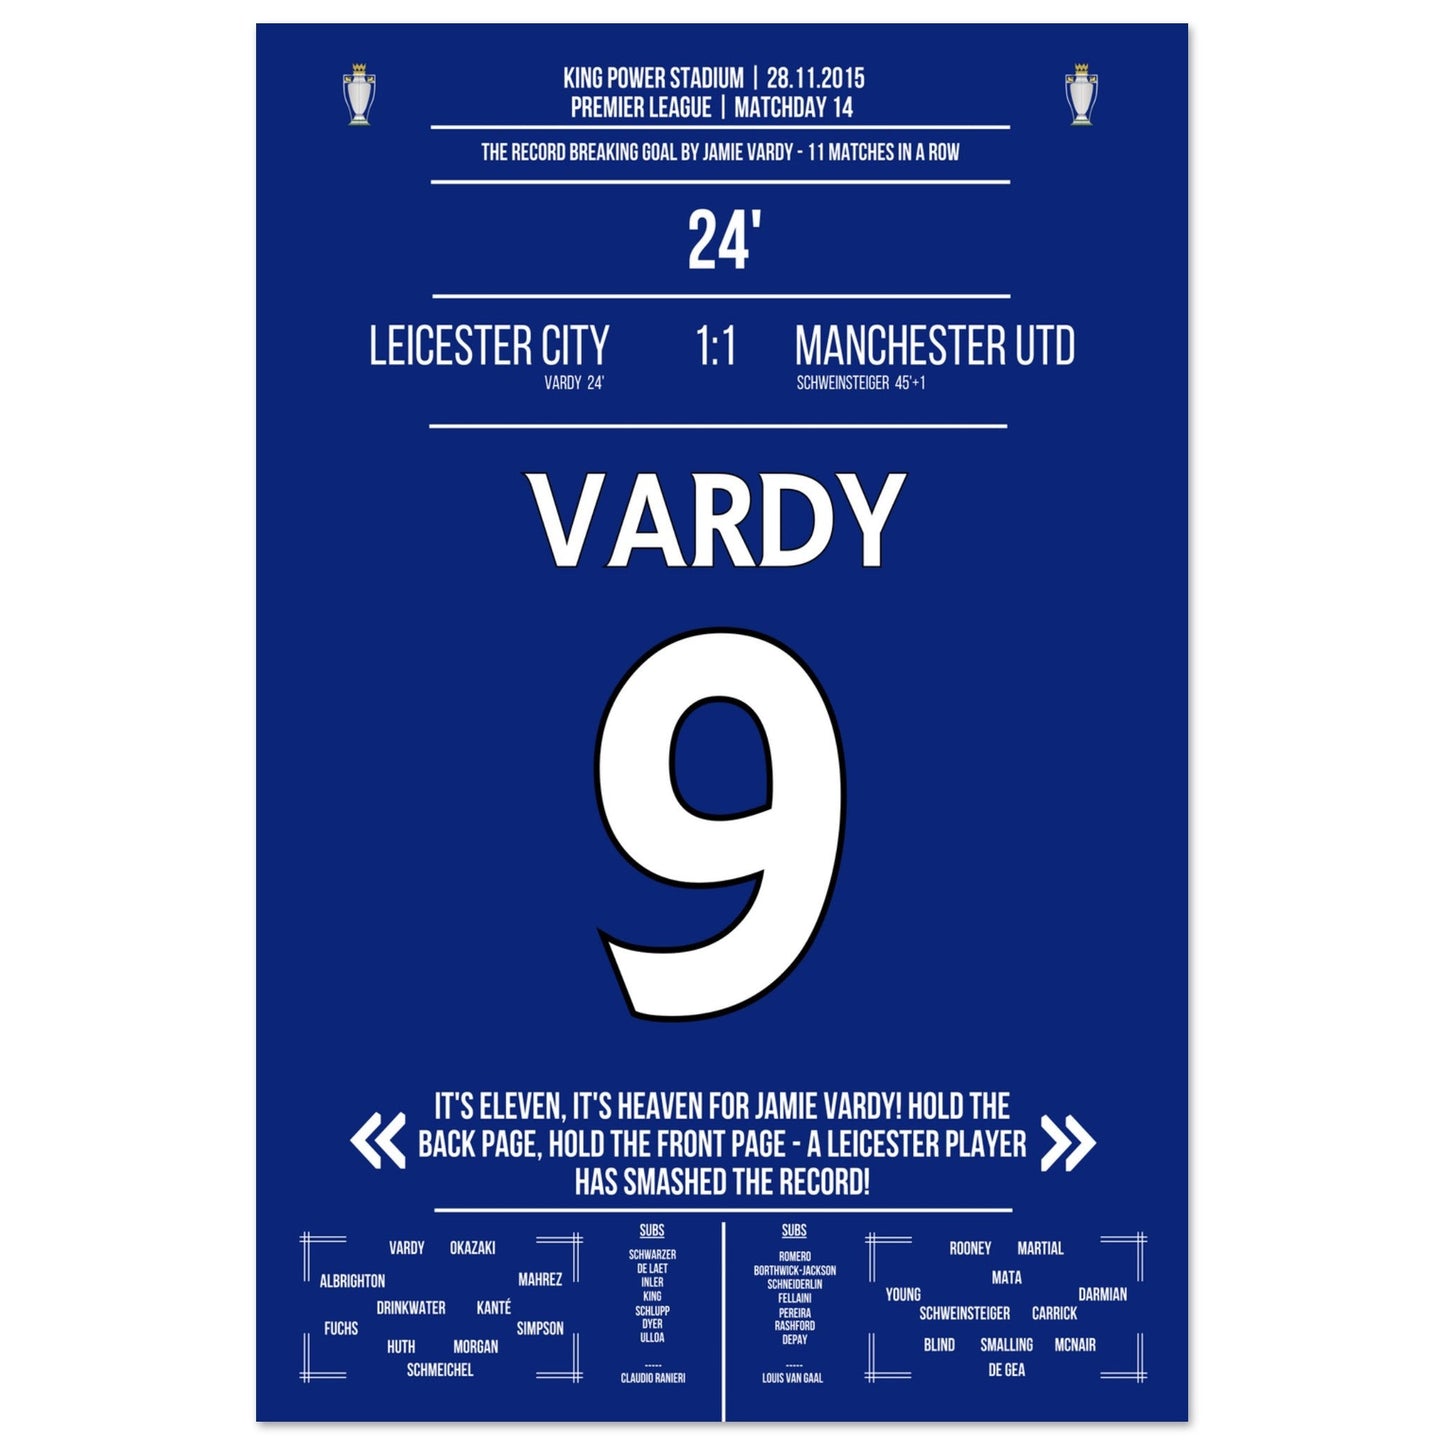 Vardy scores in the 11th game in a row and breaks the Premier League record